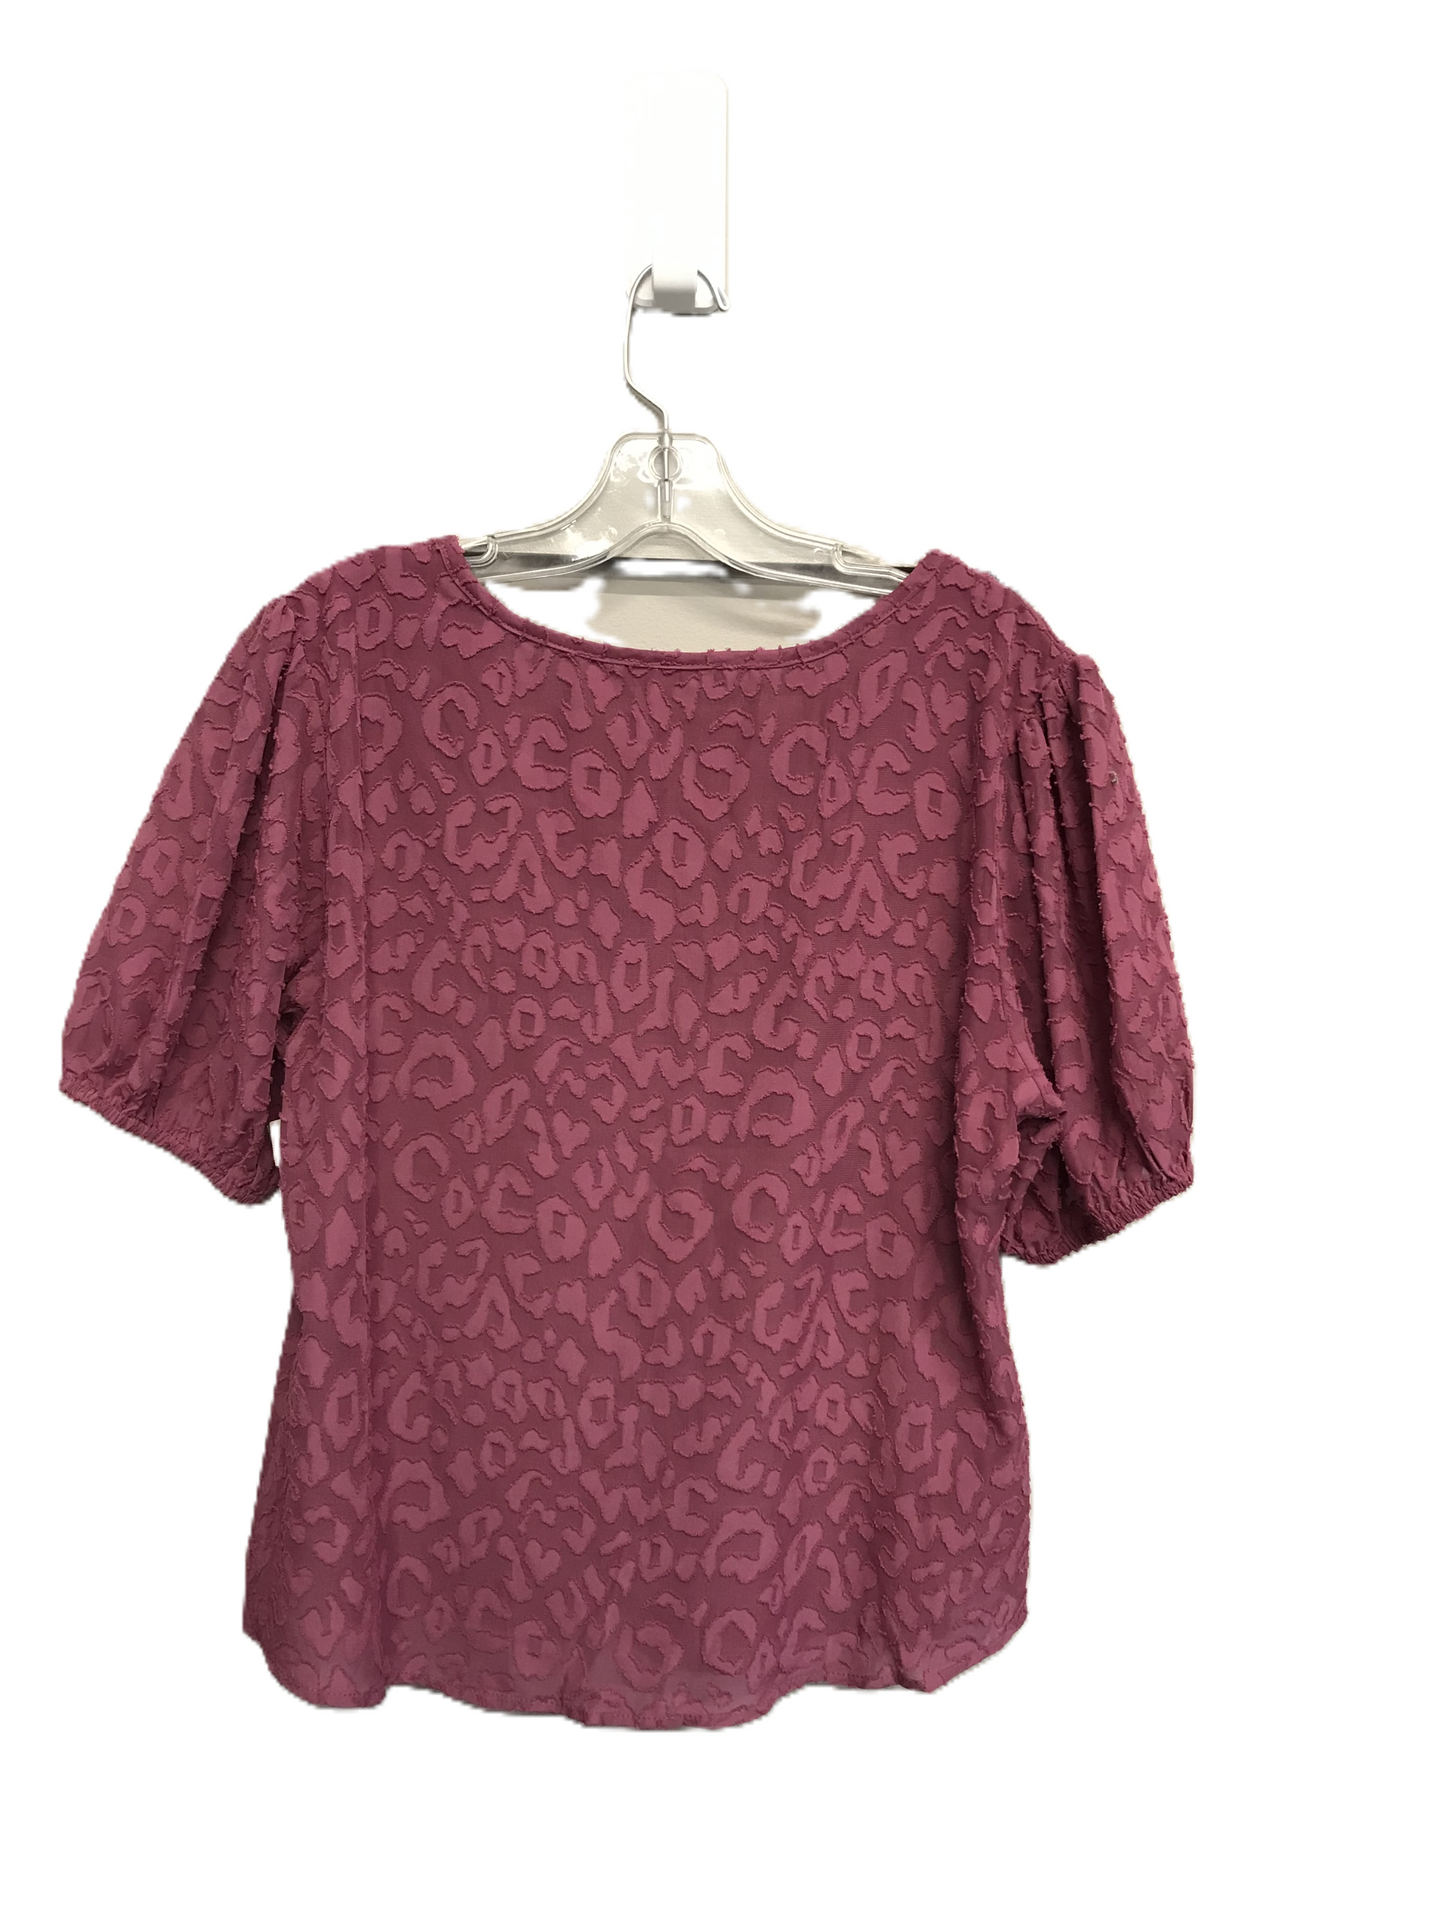 Pink Top Short Sleeve By Retrology, Size: Petite L